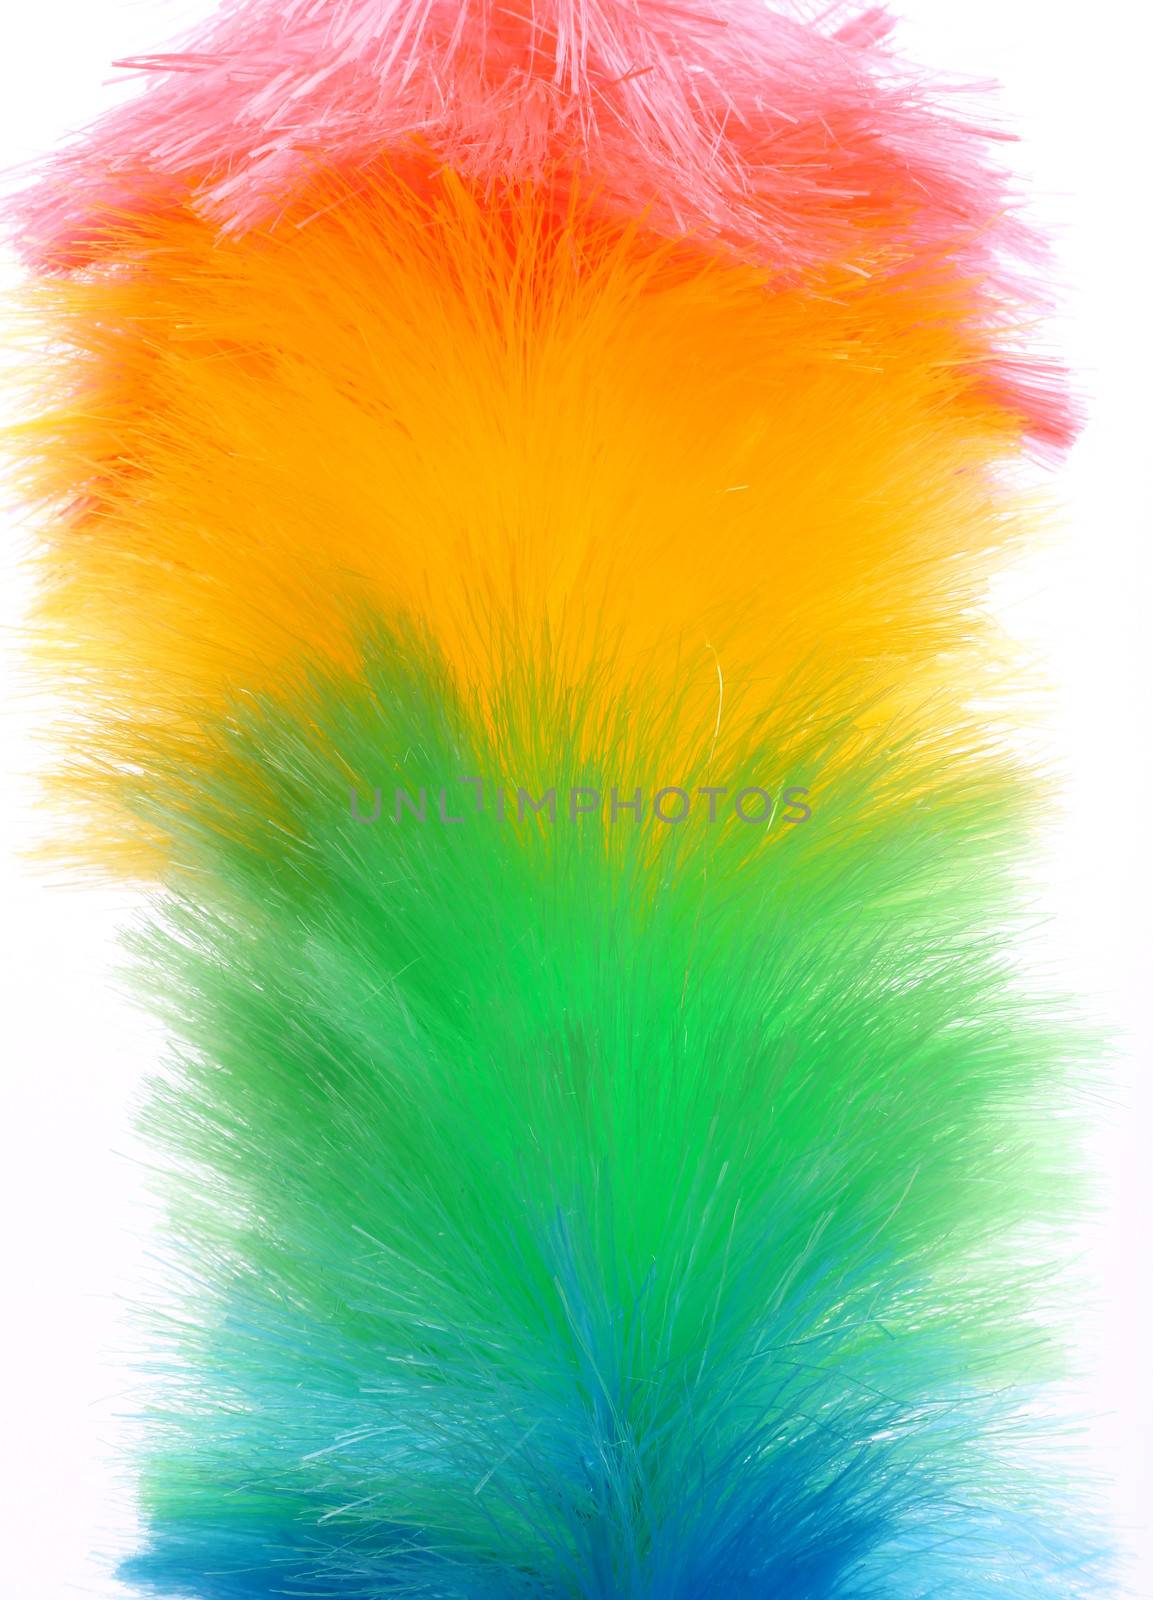 Soft colorful duster close-up by indigolotos